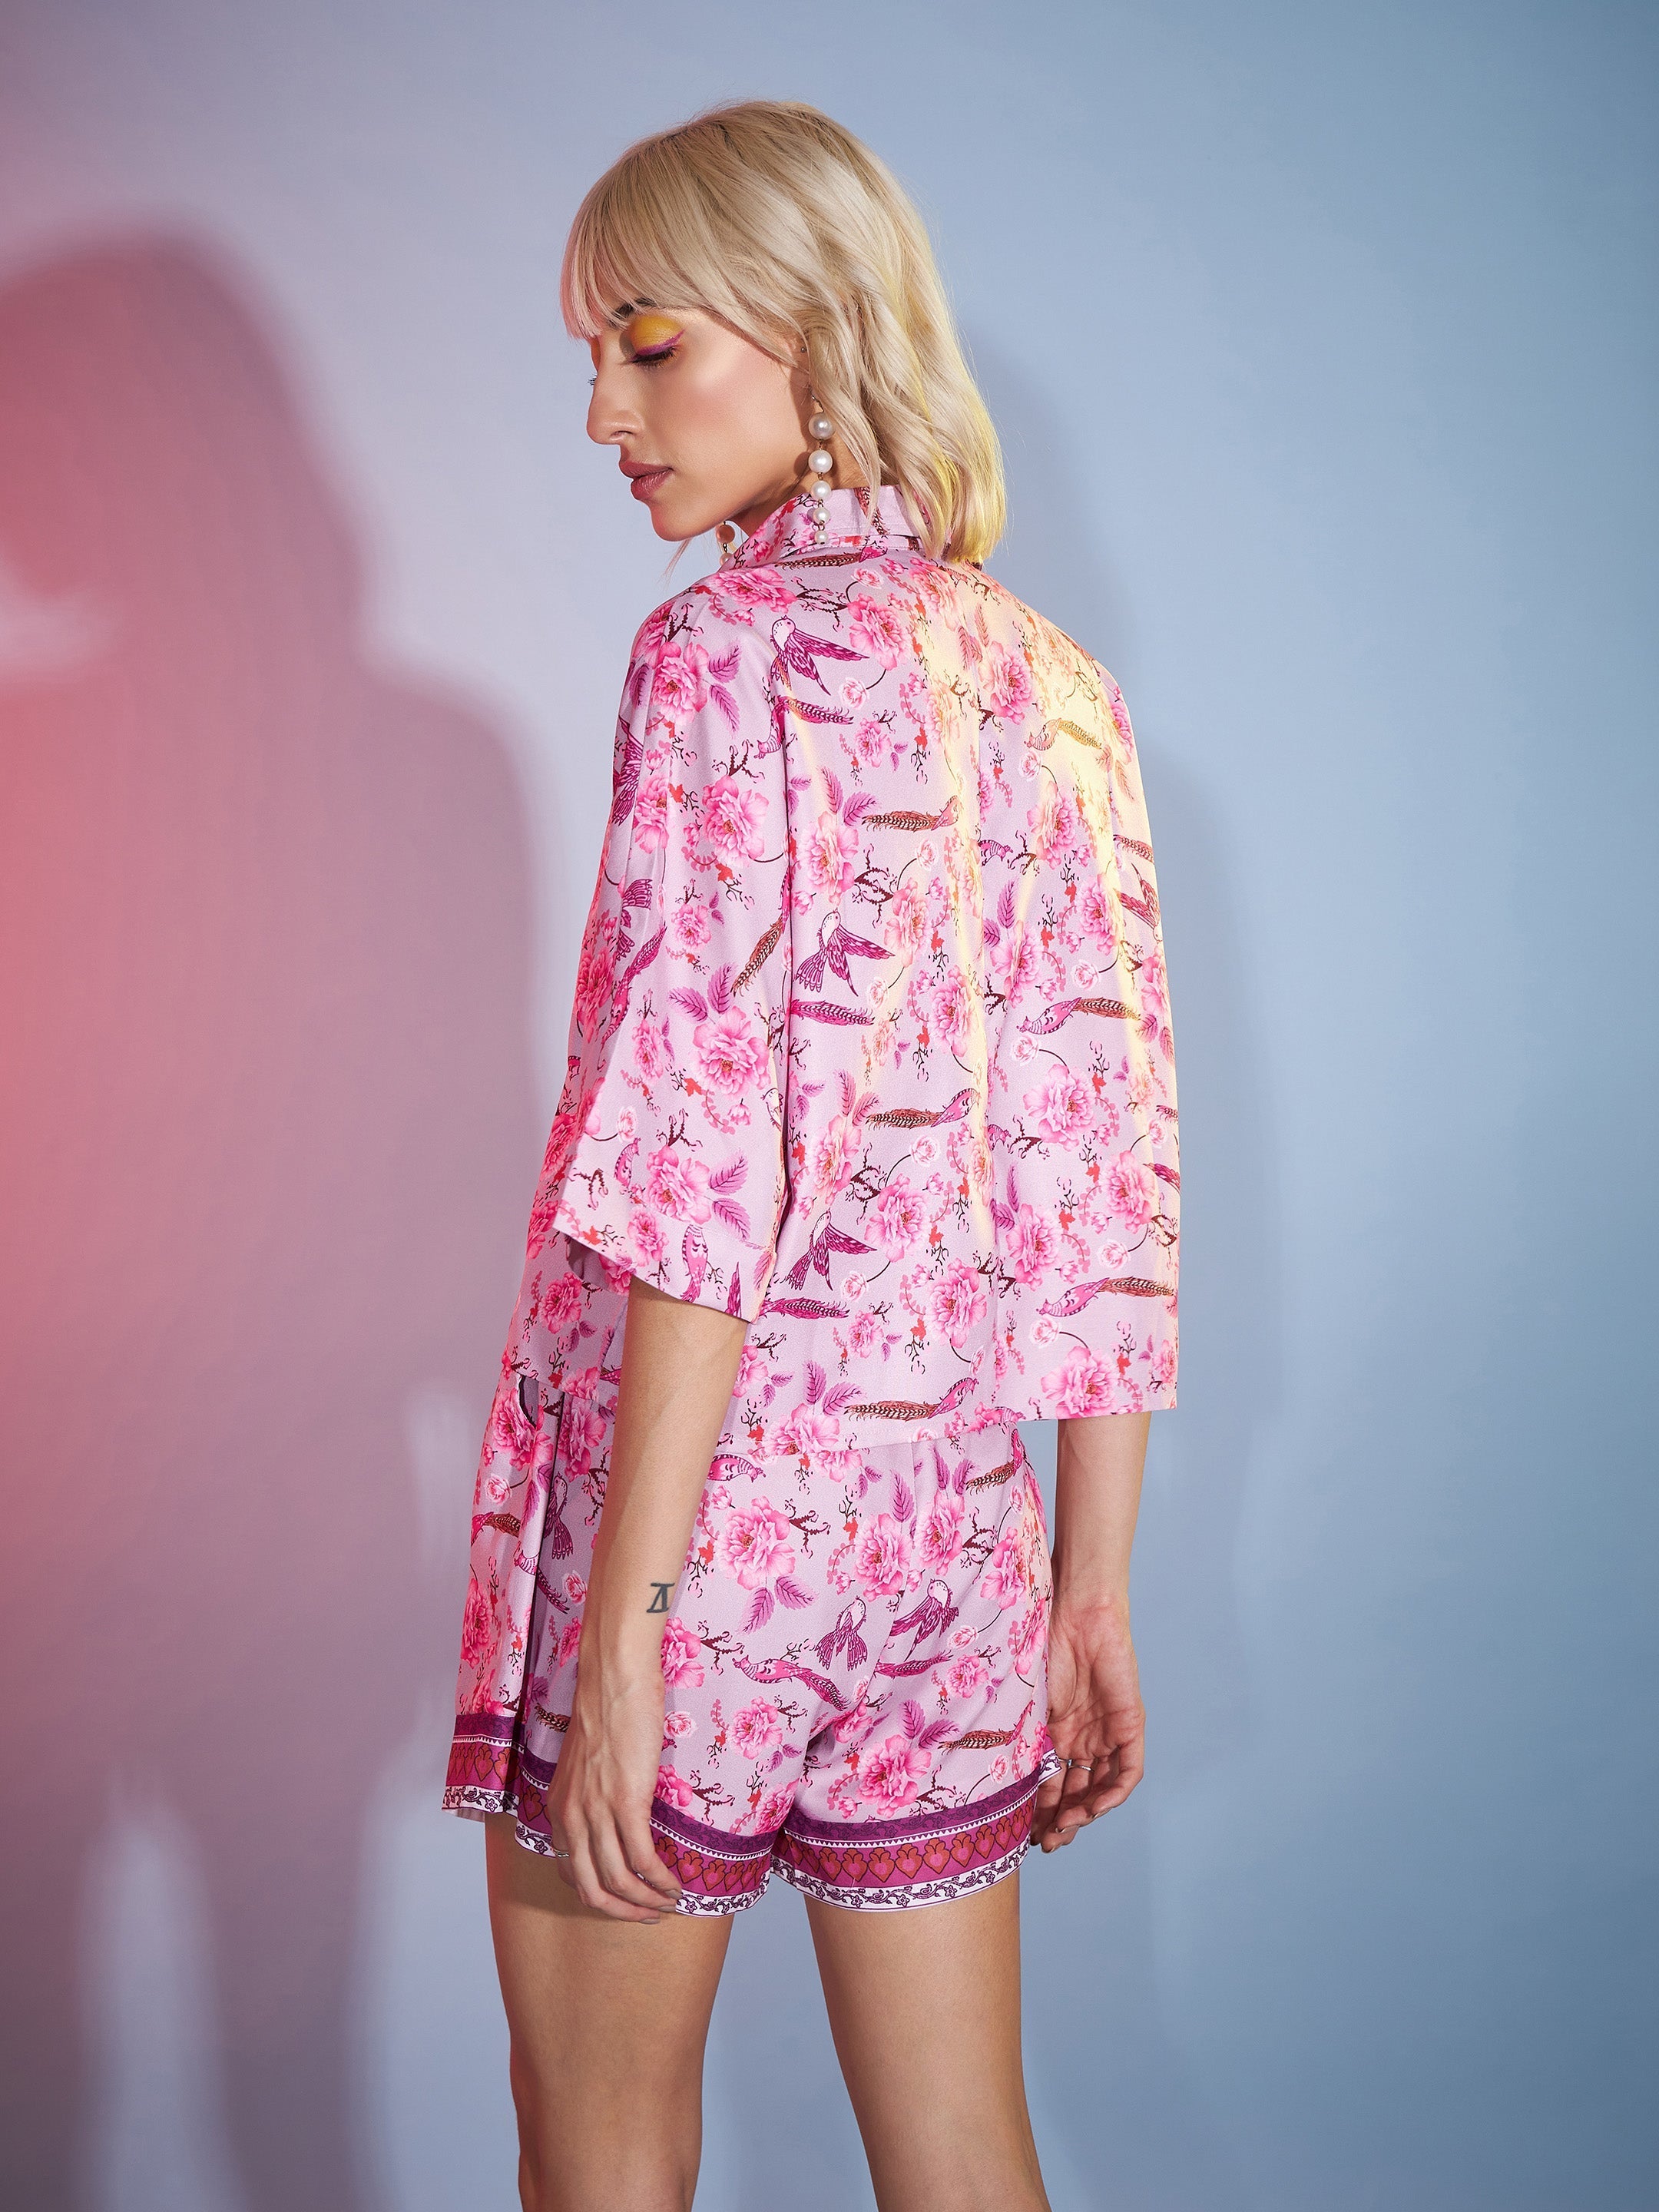 Women's Pink Floral Boxy Shirt With Paperback Shorts - SASSAFRAS